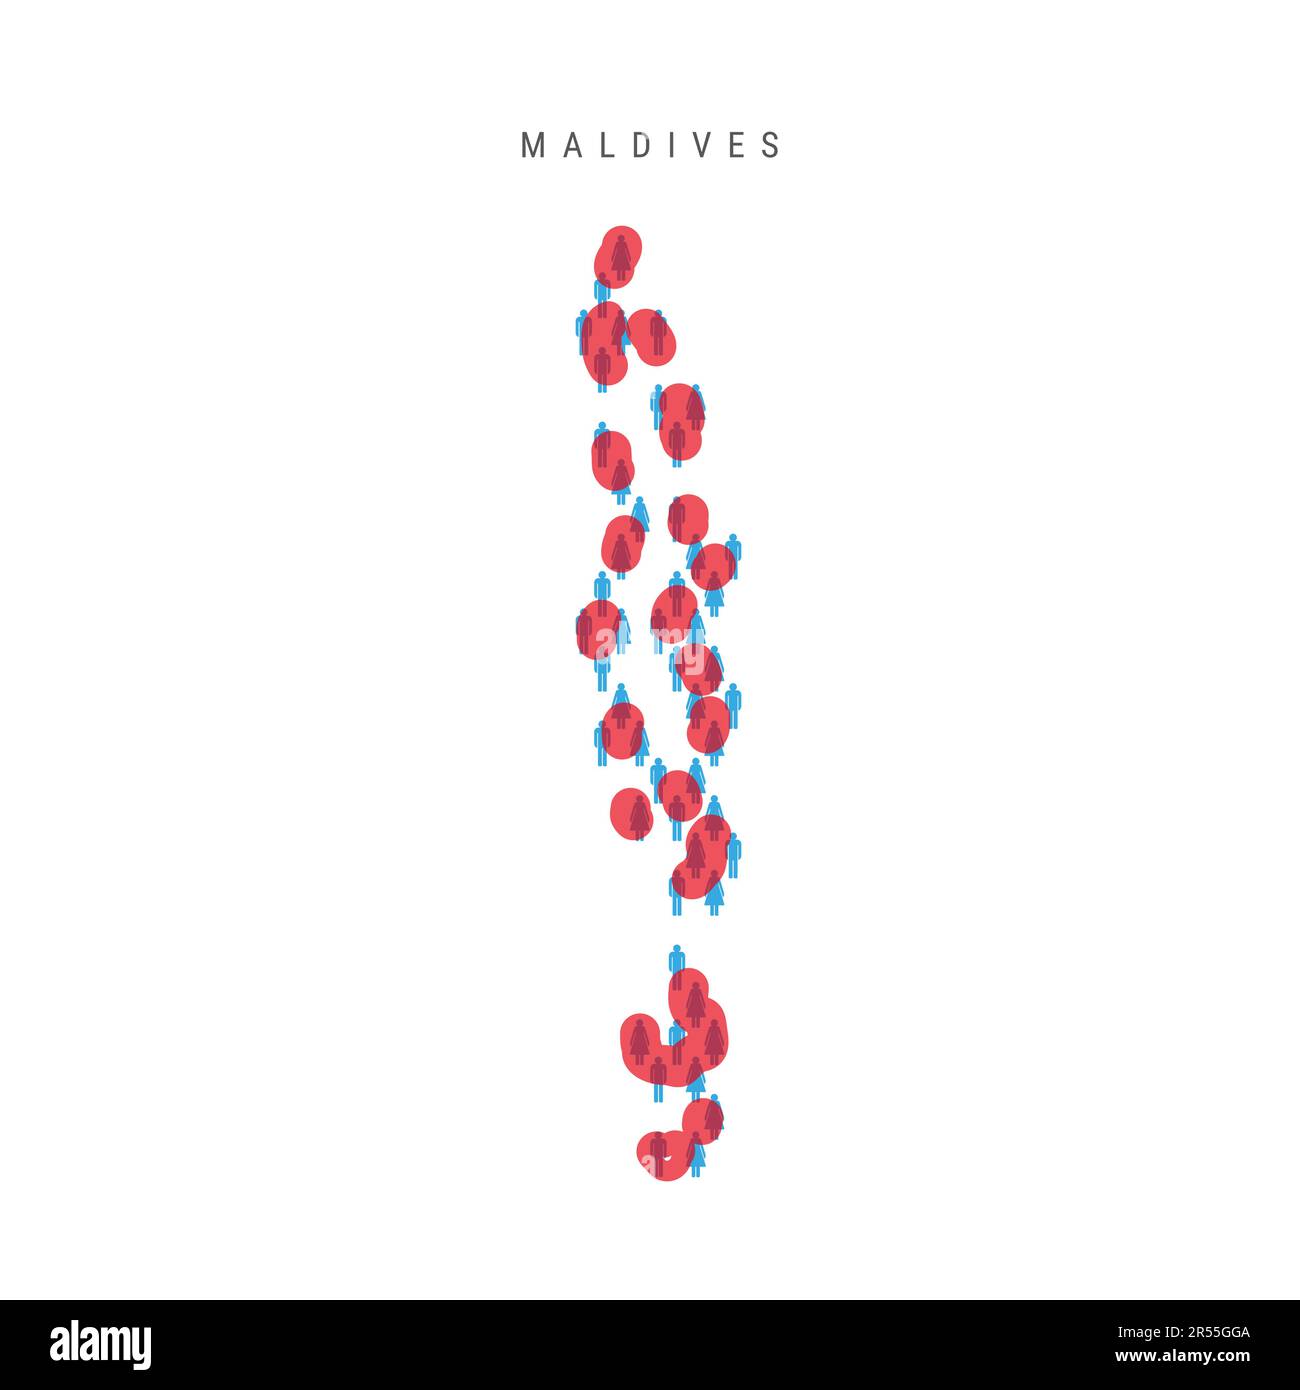 Maldives population map. Stick figures Maldivian people map with bold red translucent country border. Pattern of men and women icons. Isolated vector Stock Vector